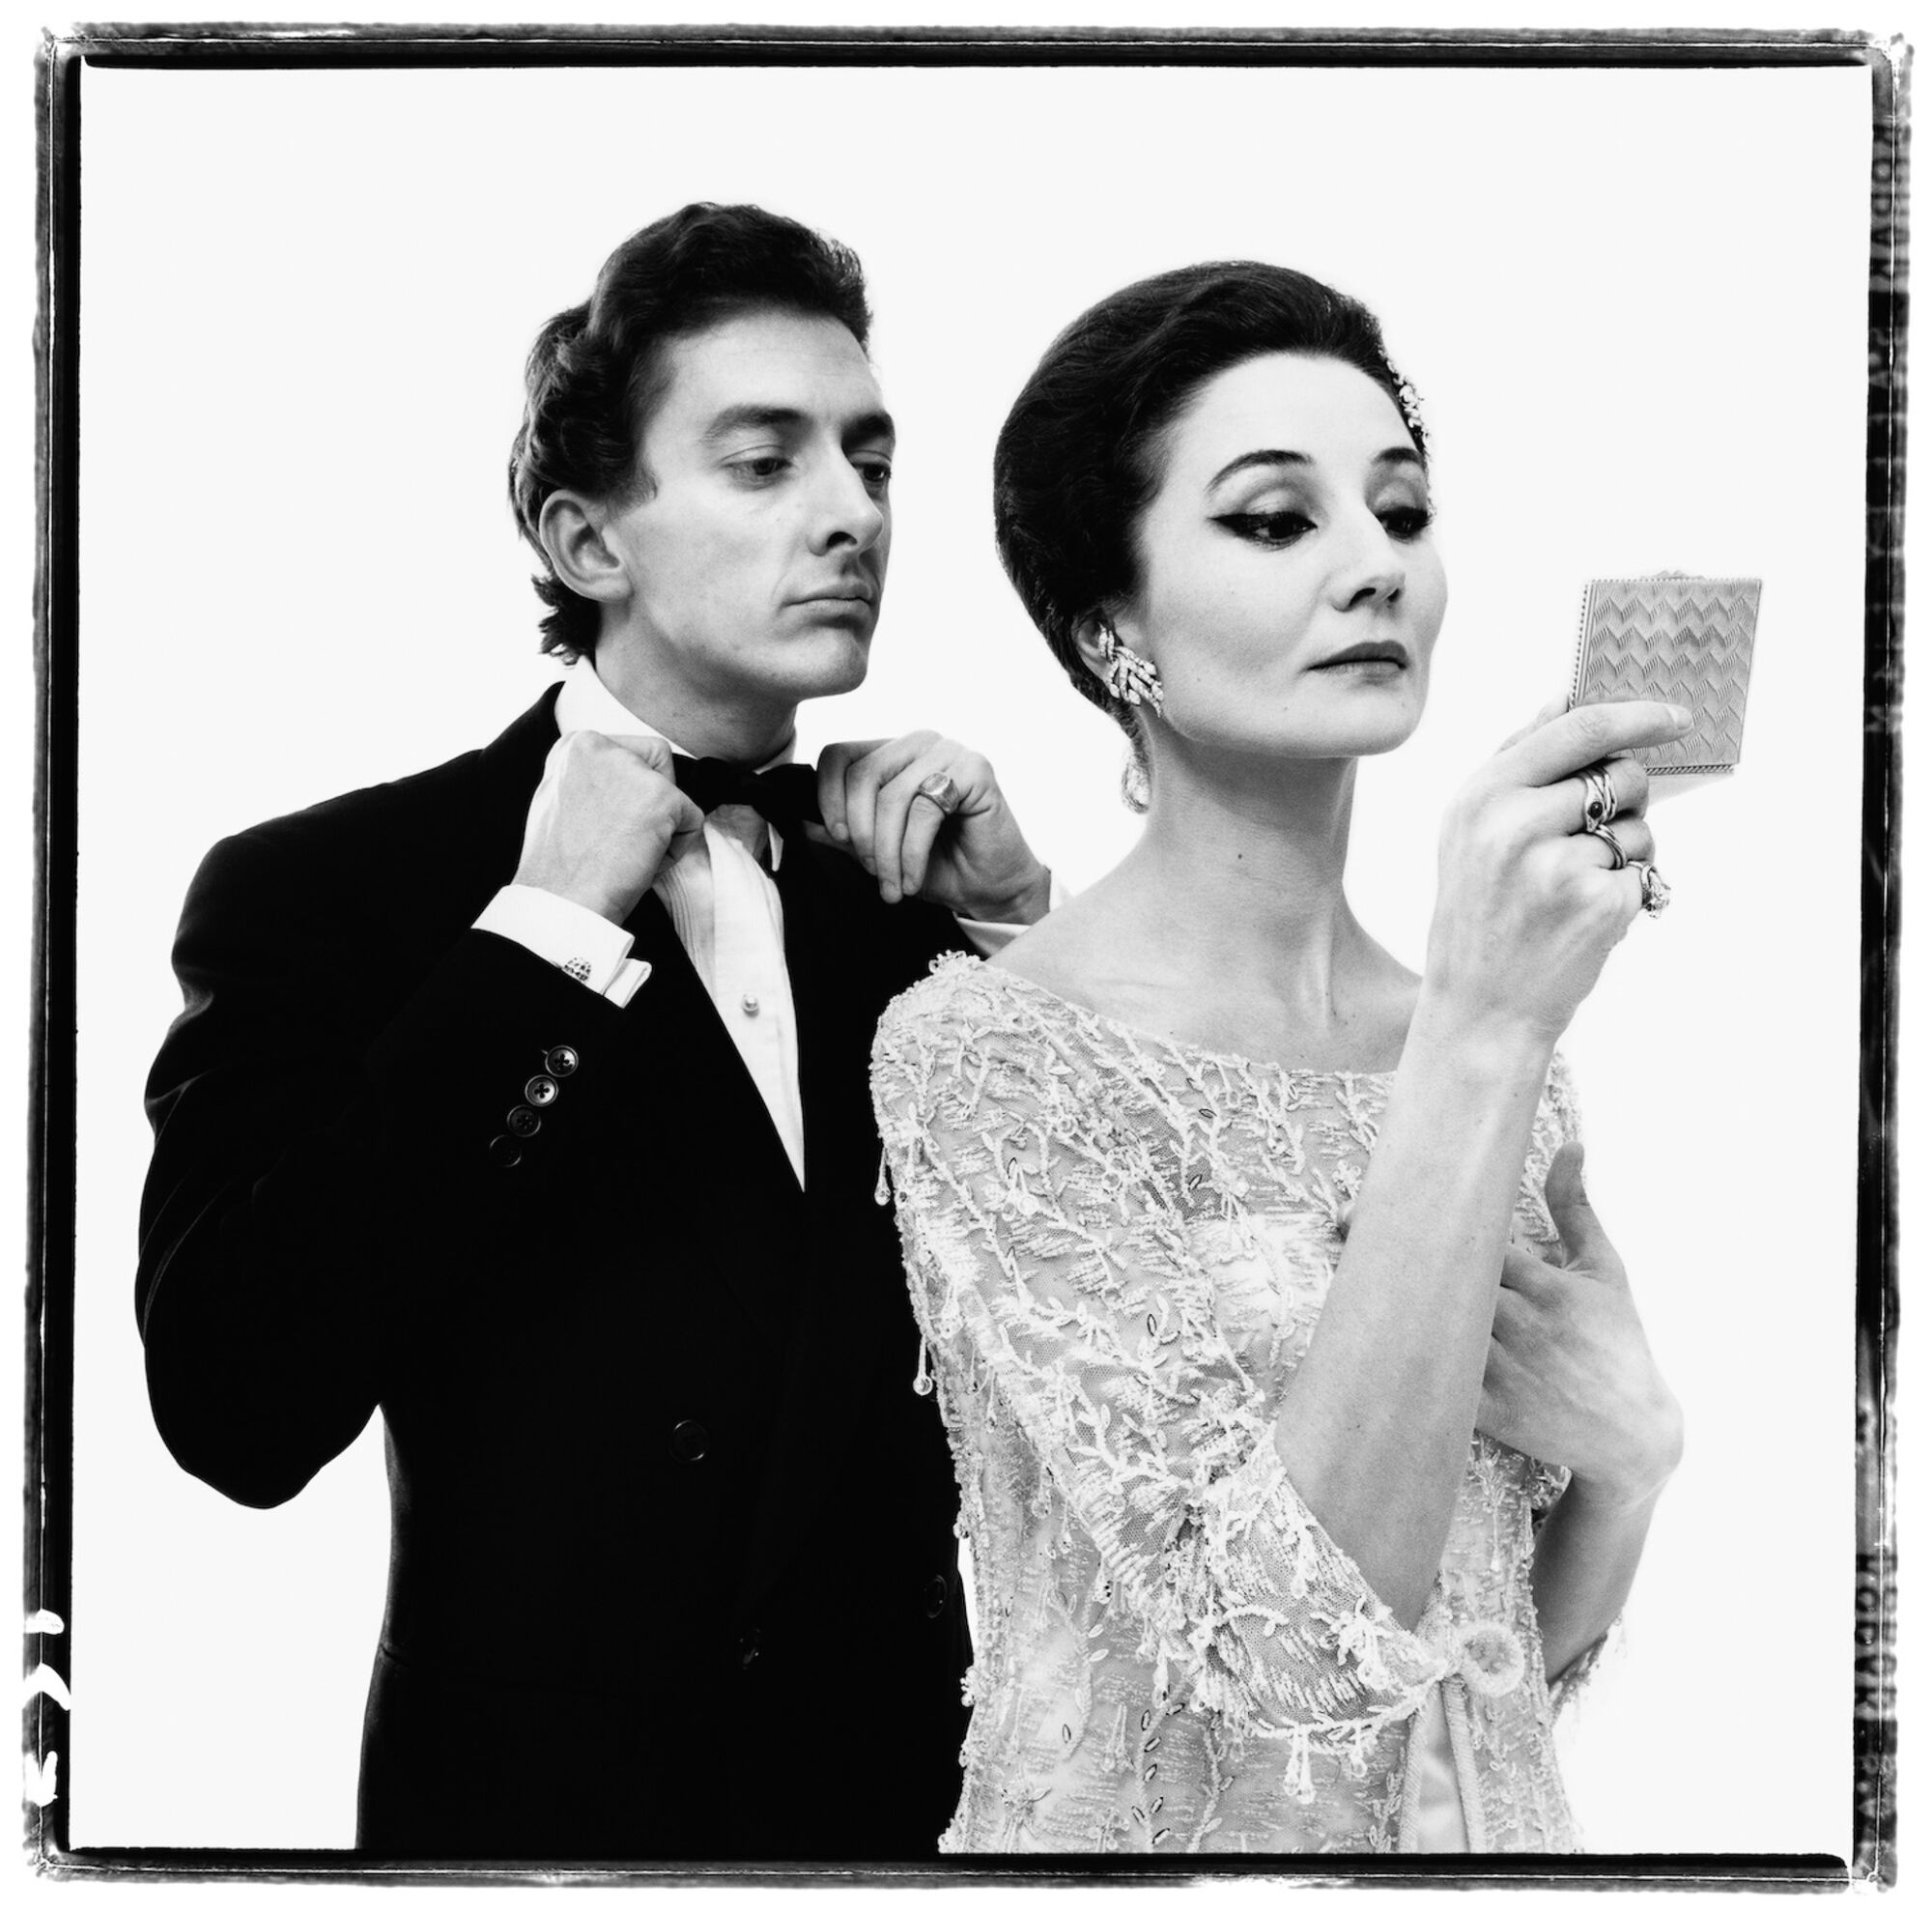 The Wick - Vicomtesse Jacqueline de Ribes and Raymundo de Larrain, New York, Flatbed scan of 105.53.
Scanned for the 2022 Avedon Centennial Exhibition